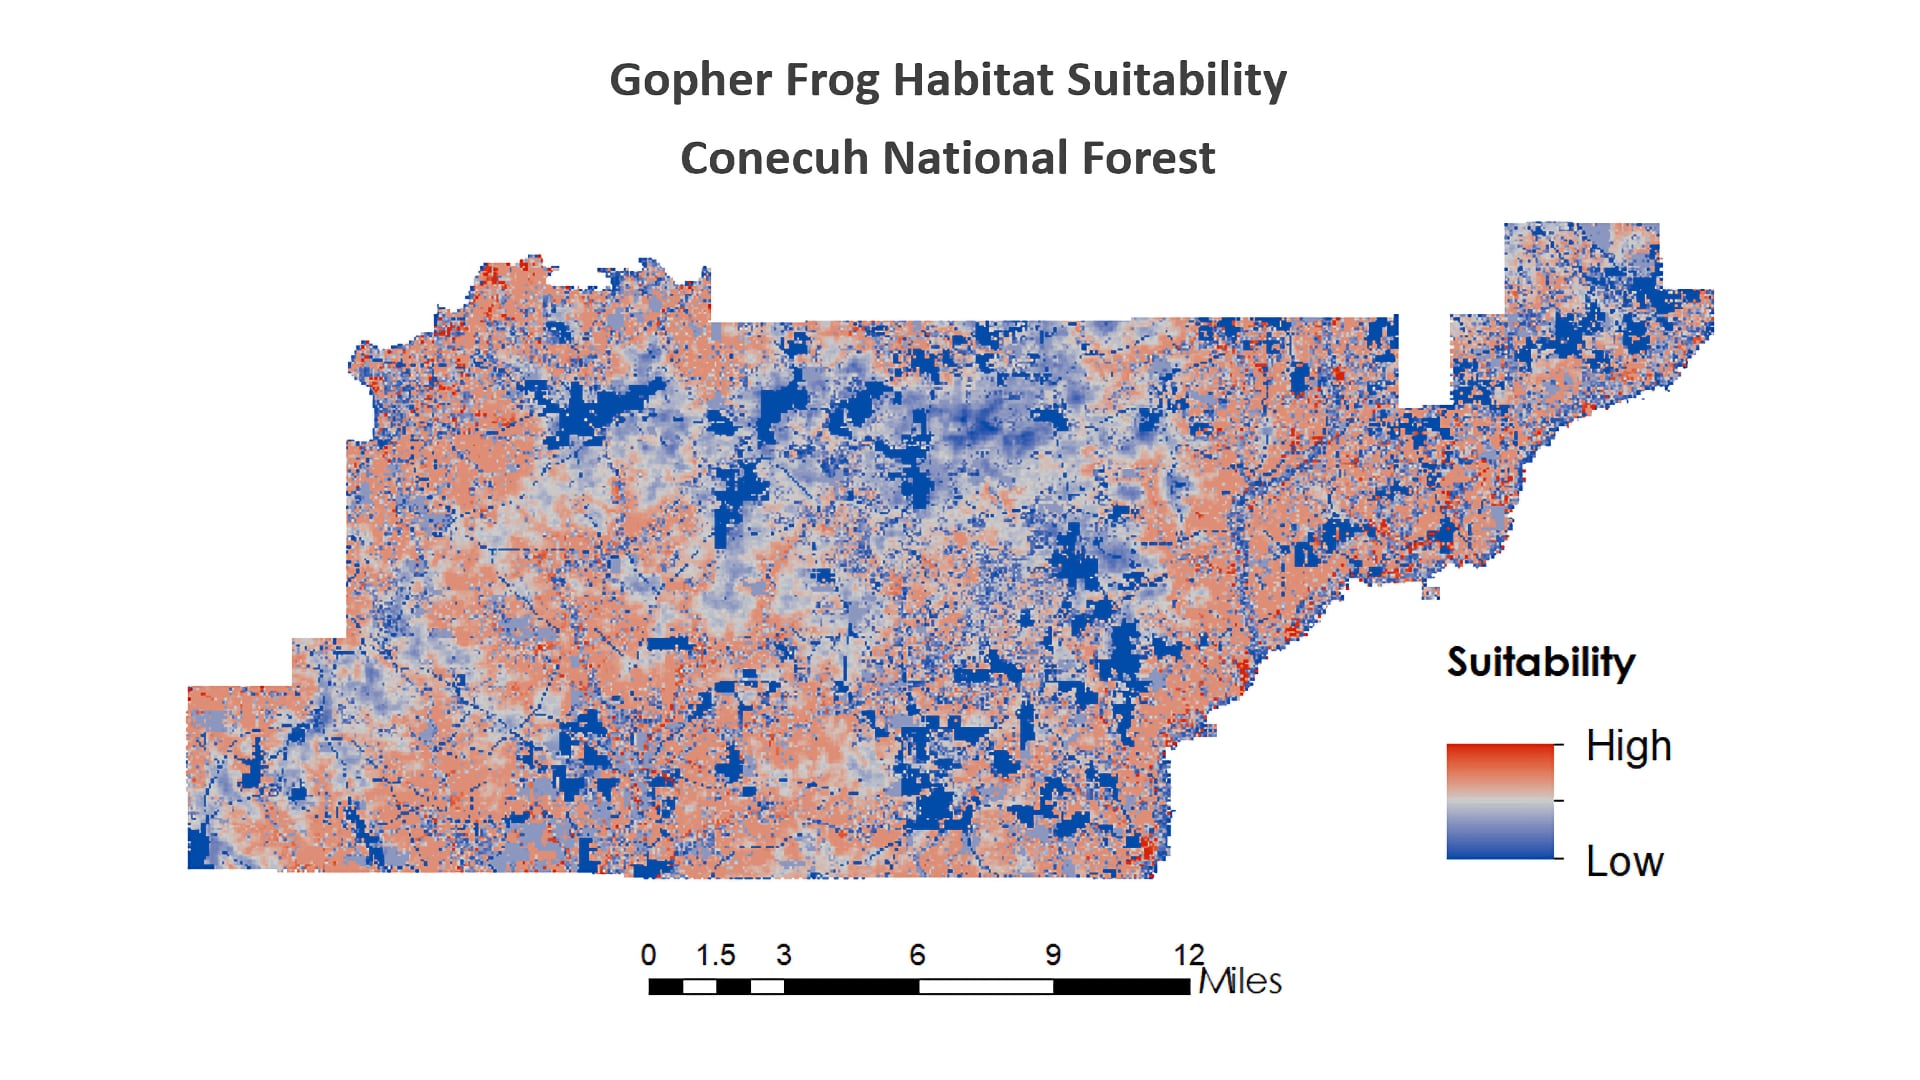 A suitability map generated by the NASA DEVELOP team illustrates highly suitable gopher frog habitat areas that could be prioritized for the protection of the gopher frog. Image credit: NASA DEVELOP